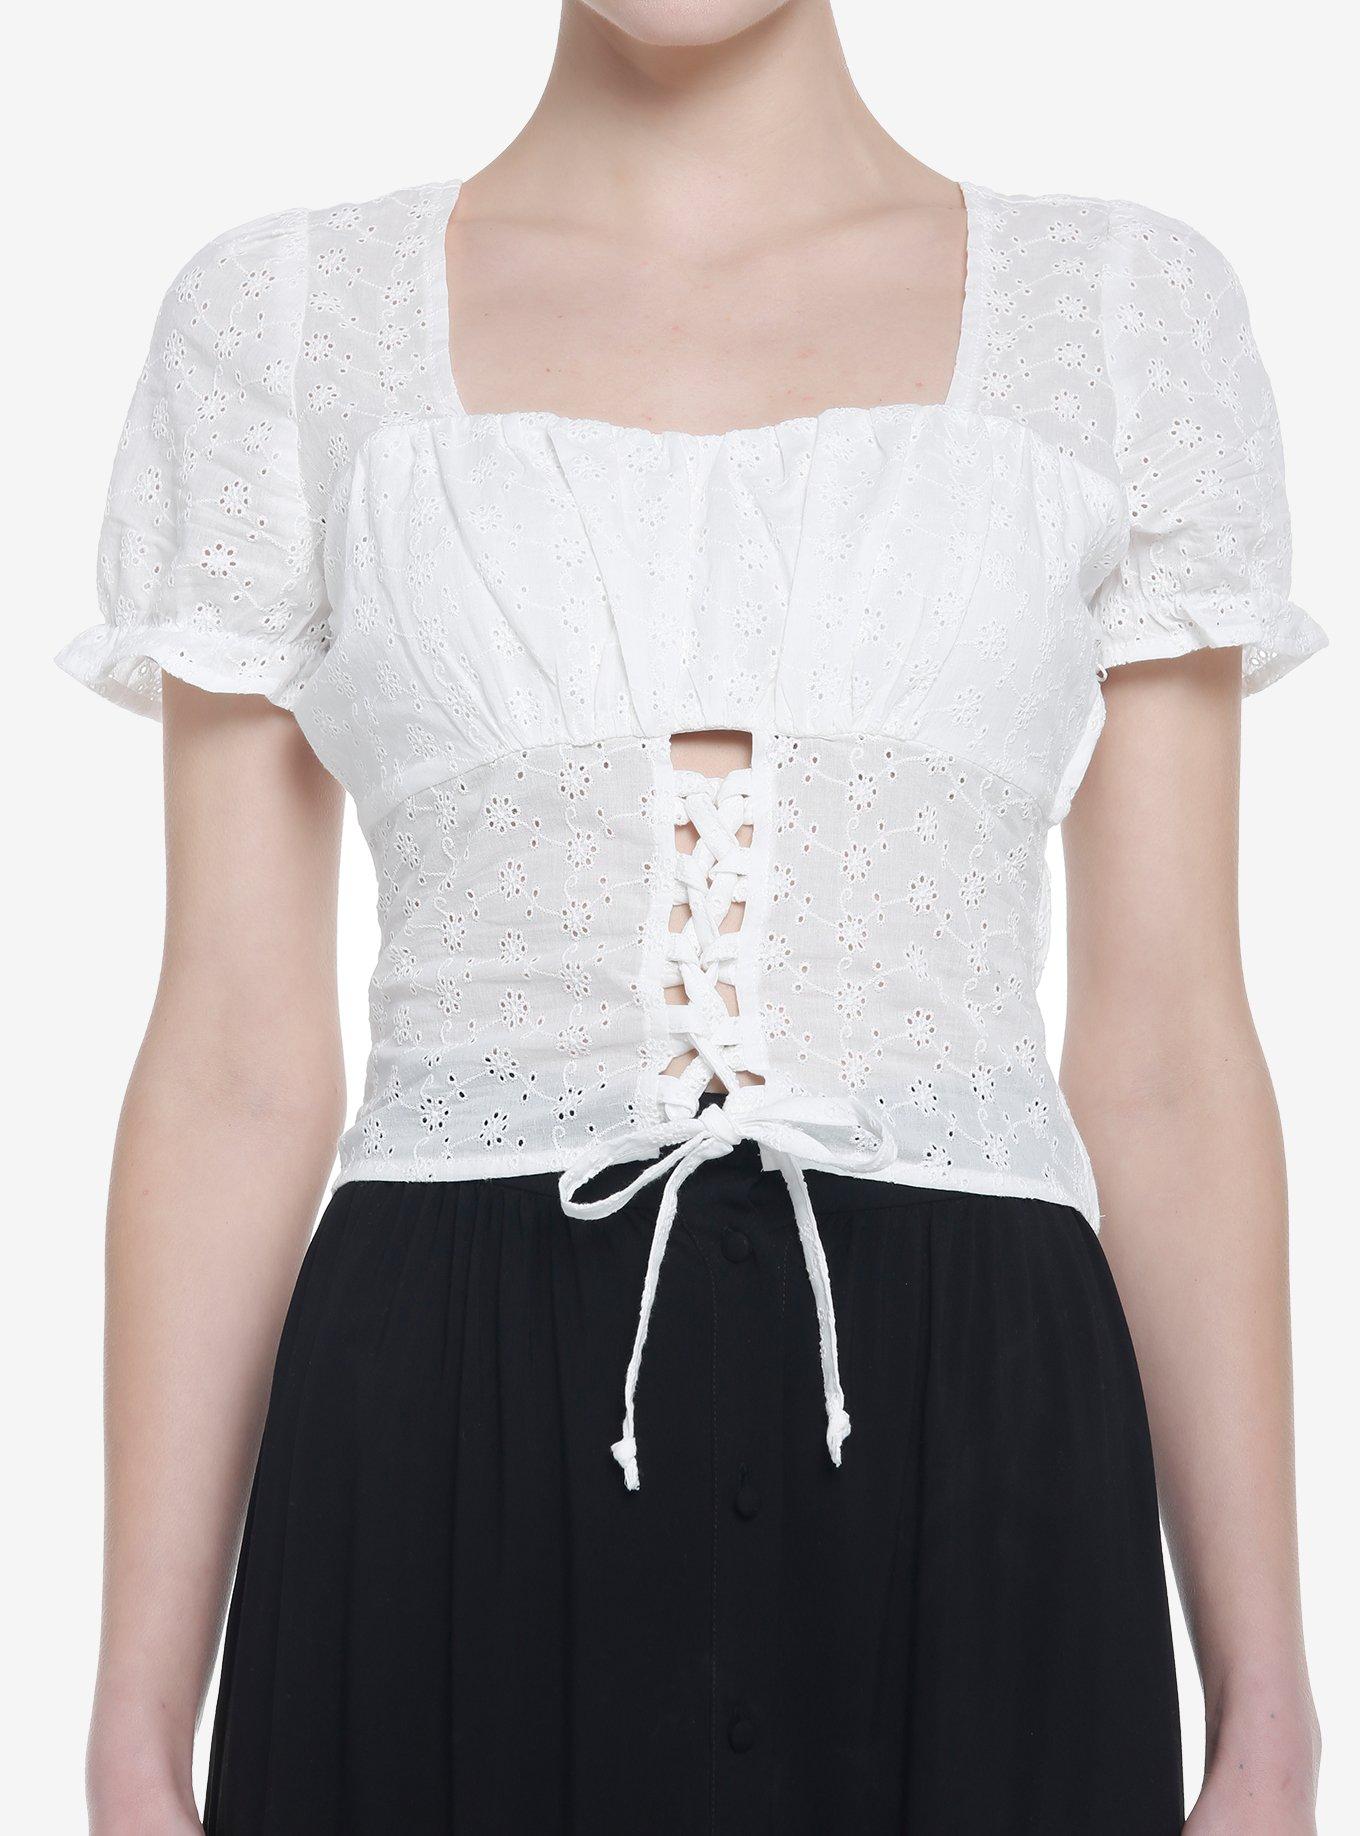 White Floral Lace-Up Girls Crop Top, WHITE, hi-res